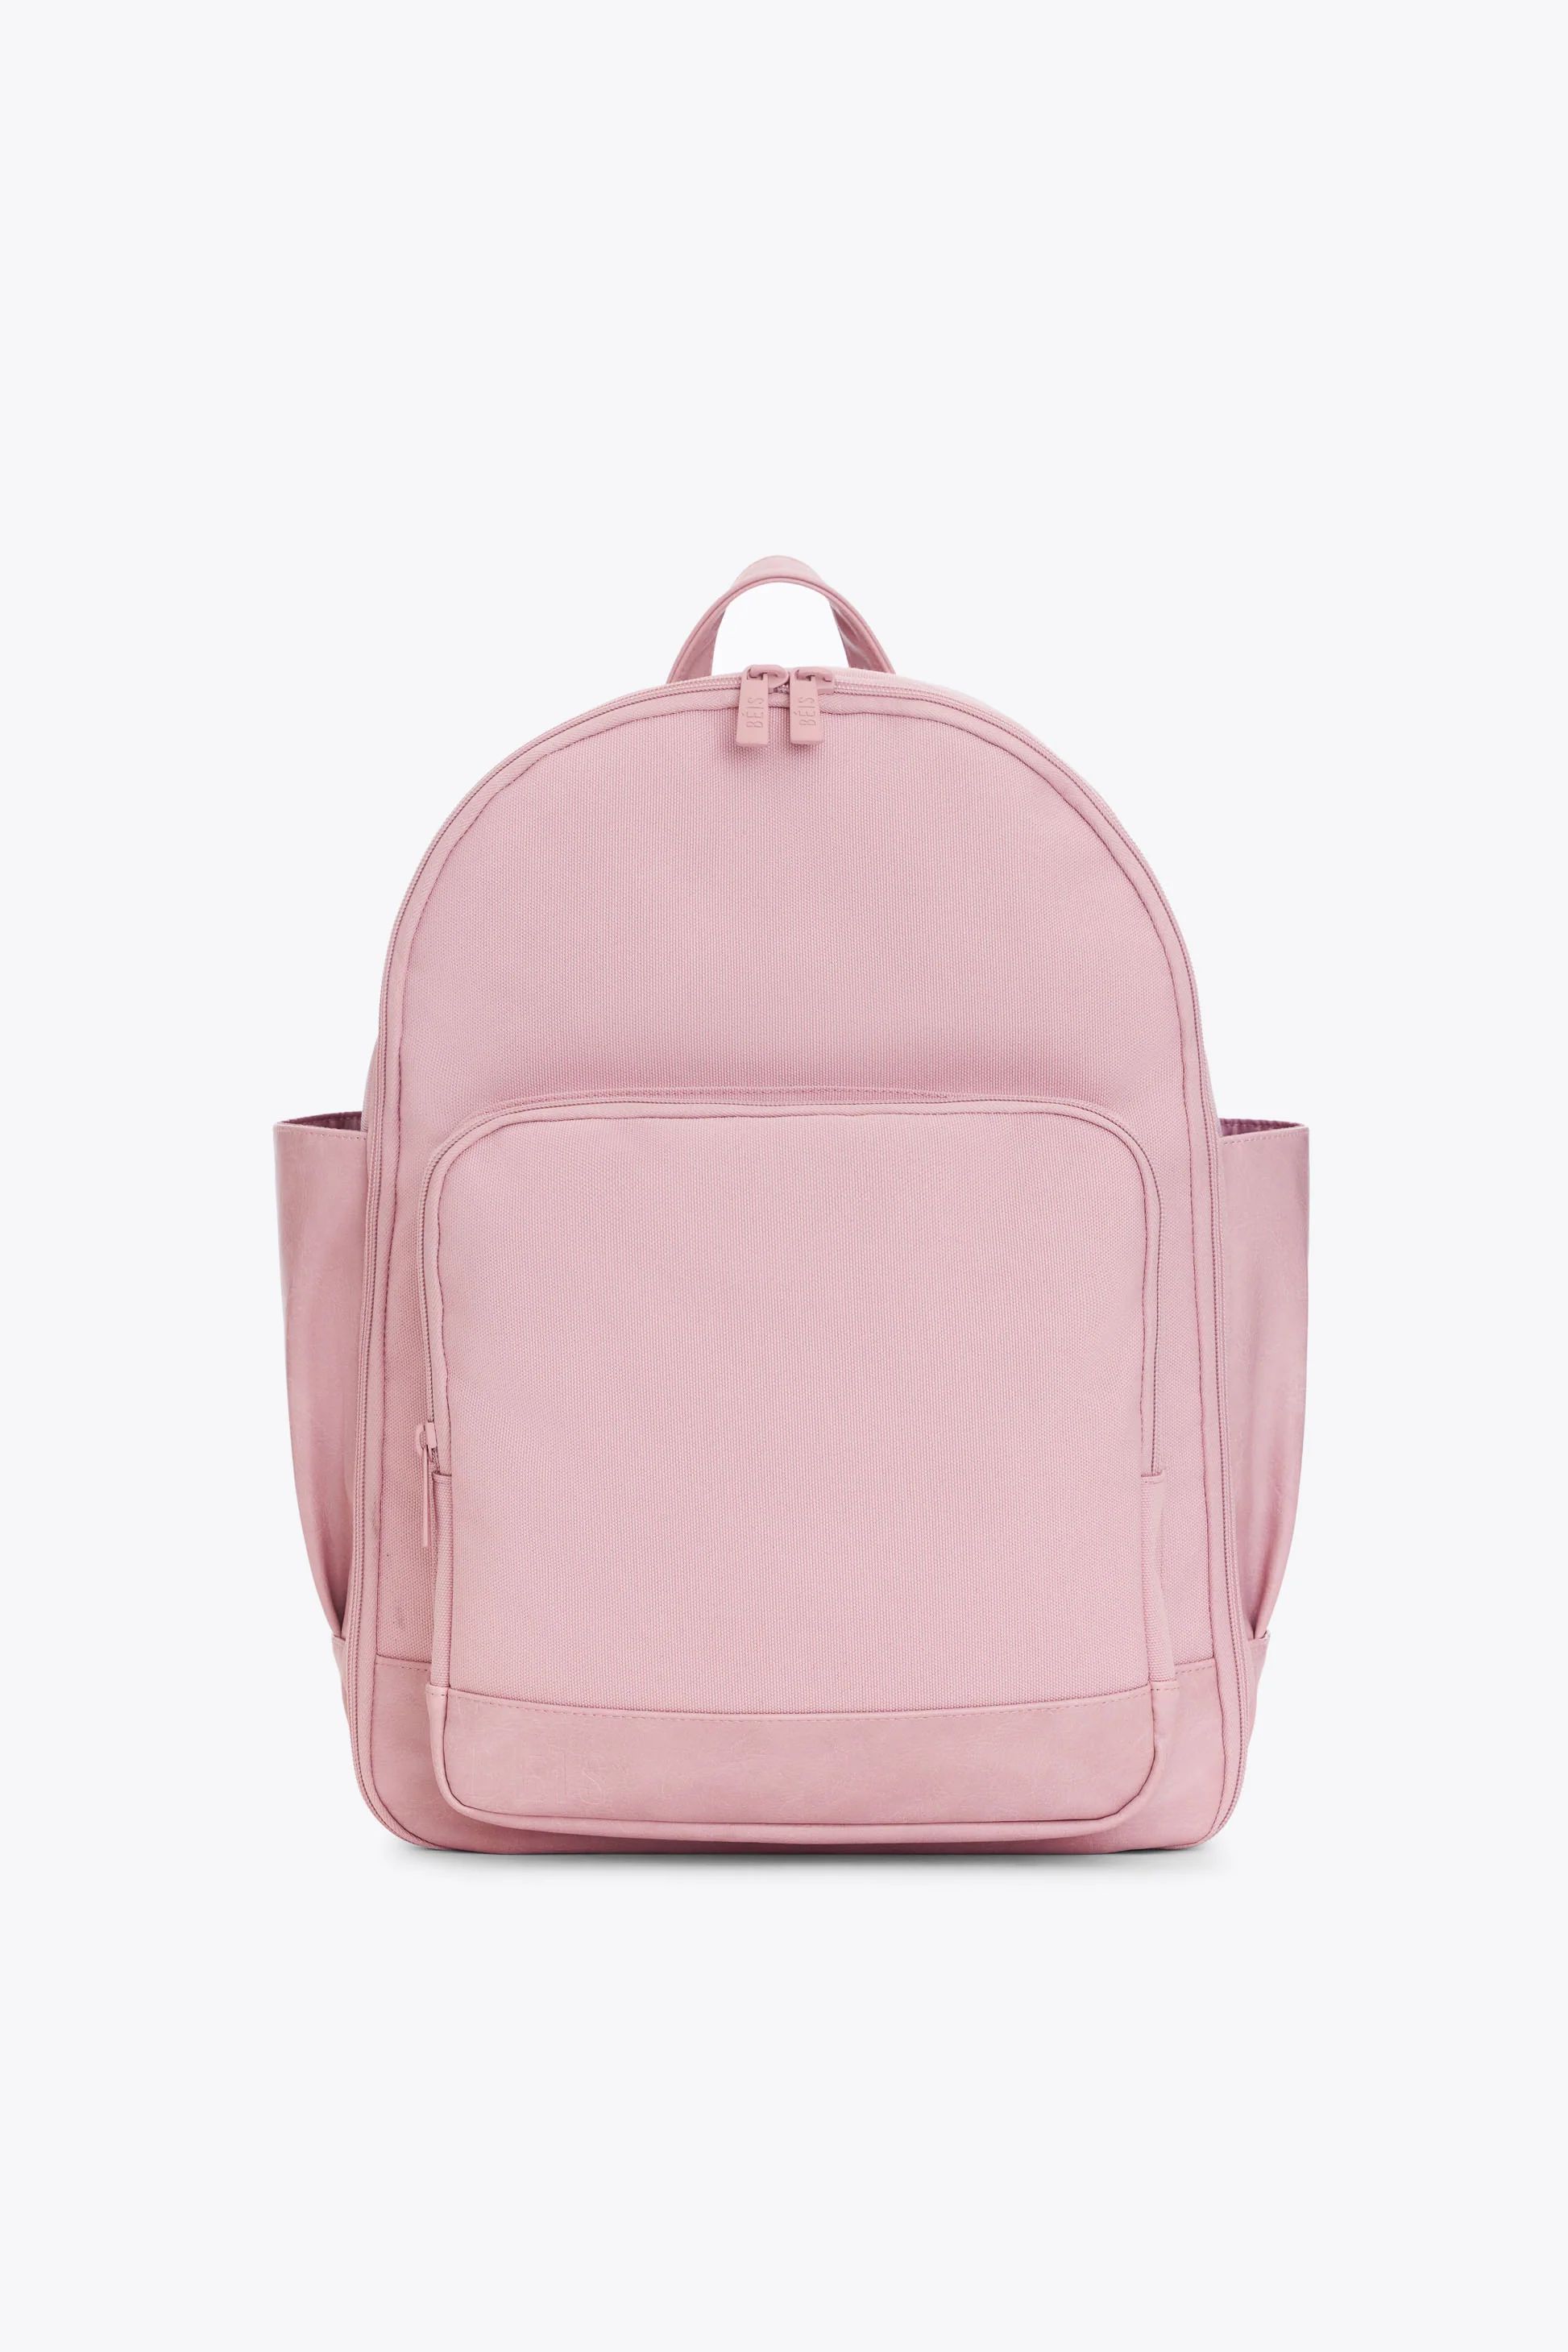 The Backpack in Atlas Pink | BÉIS Travel